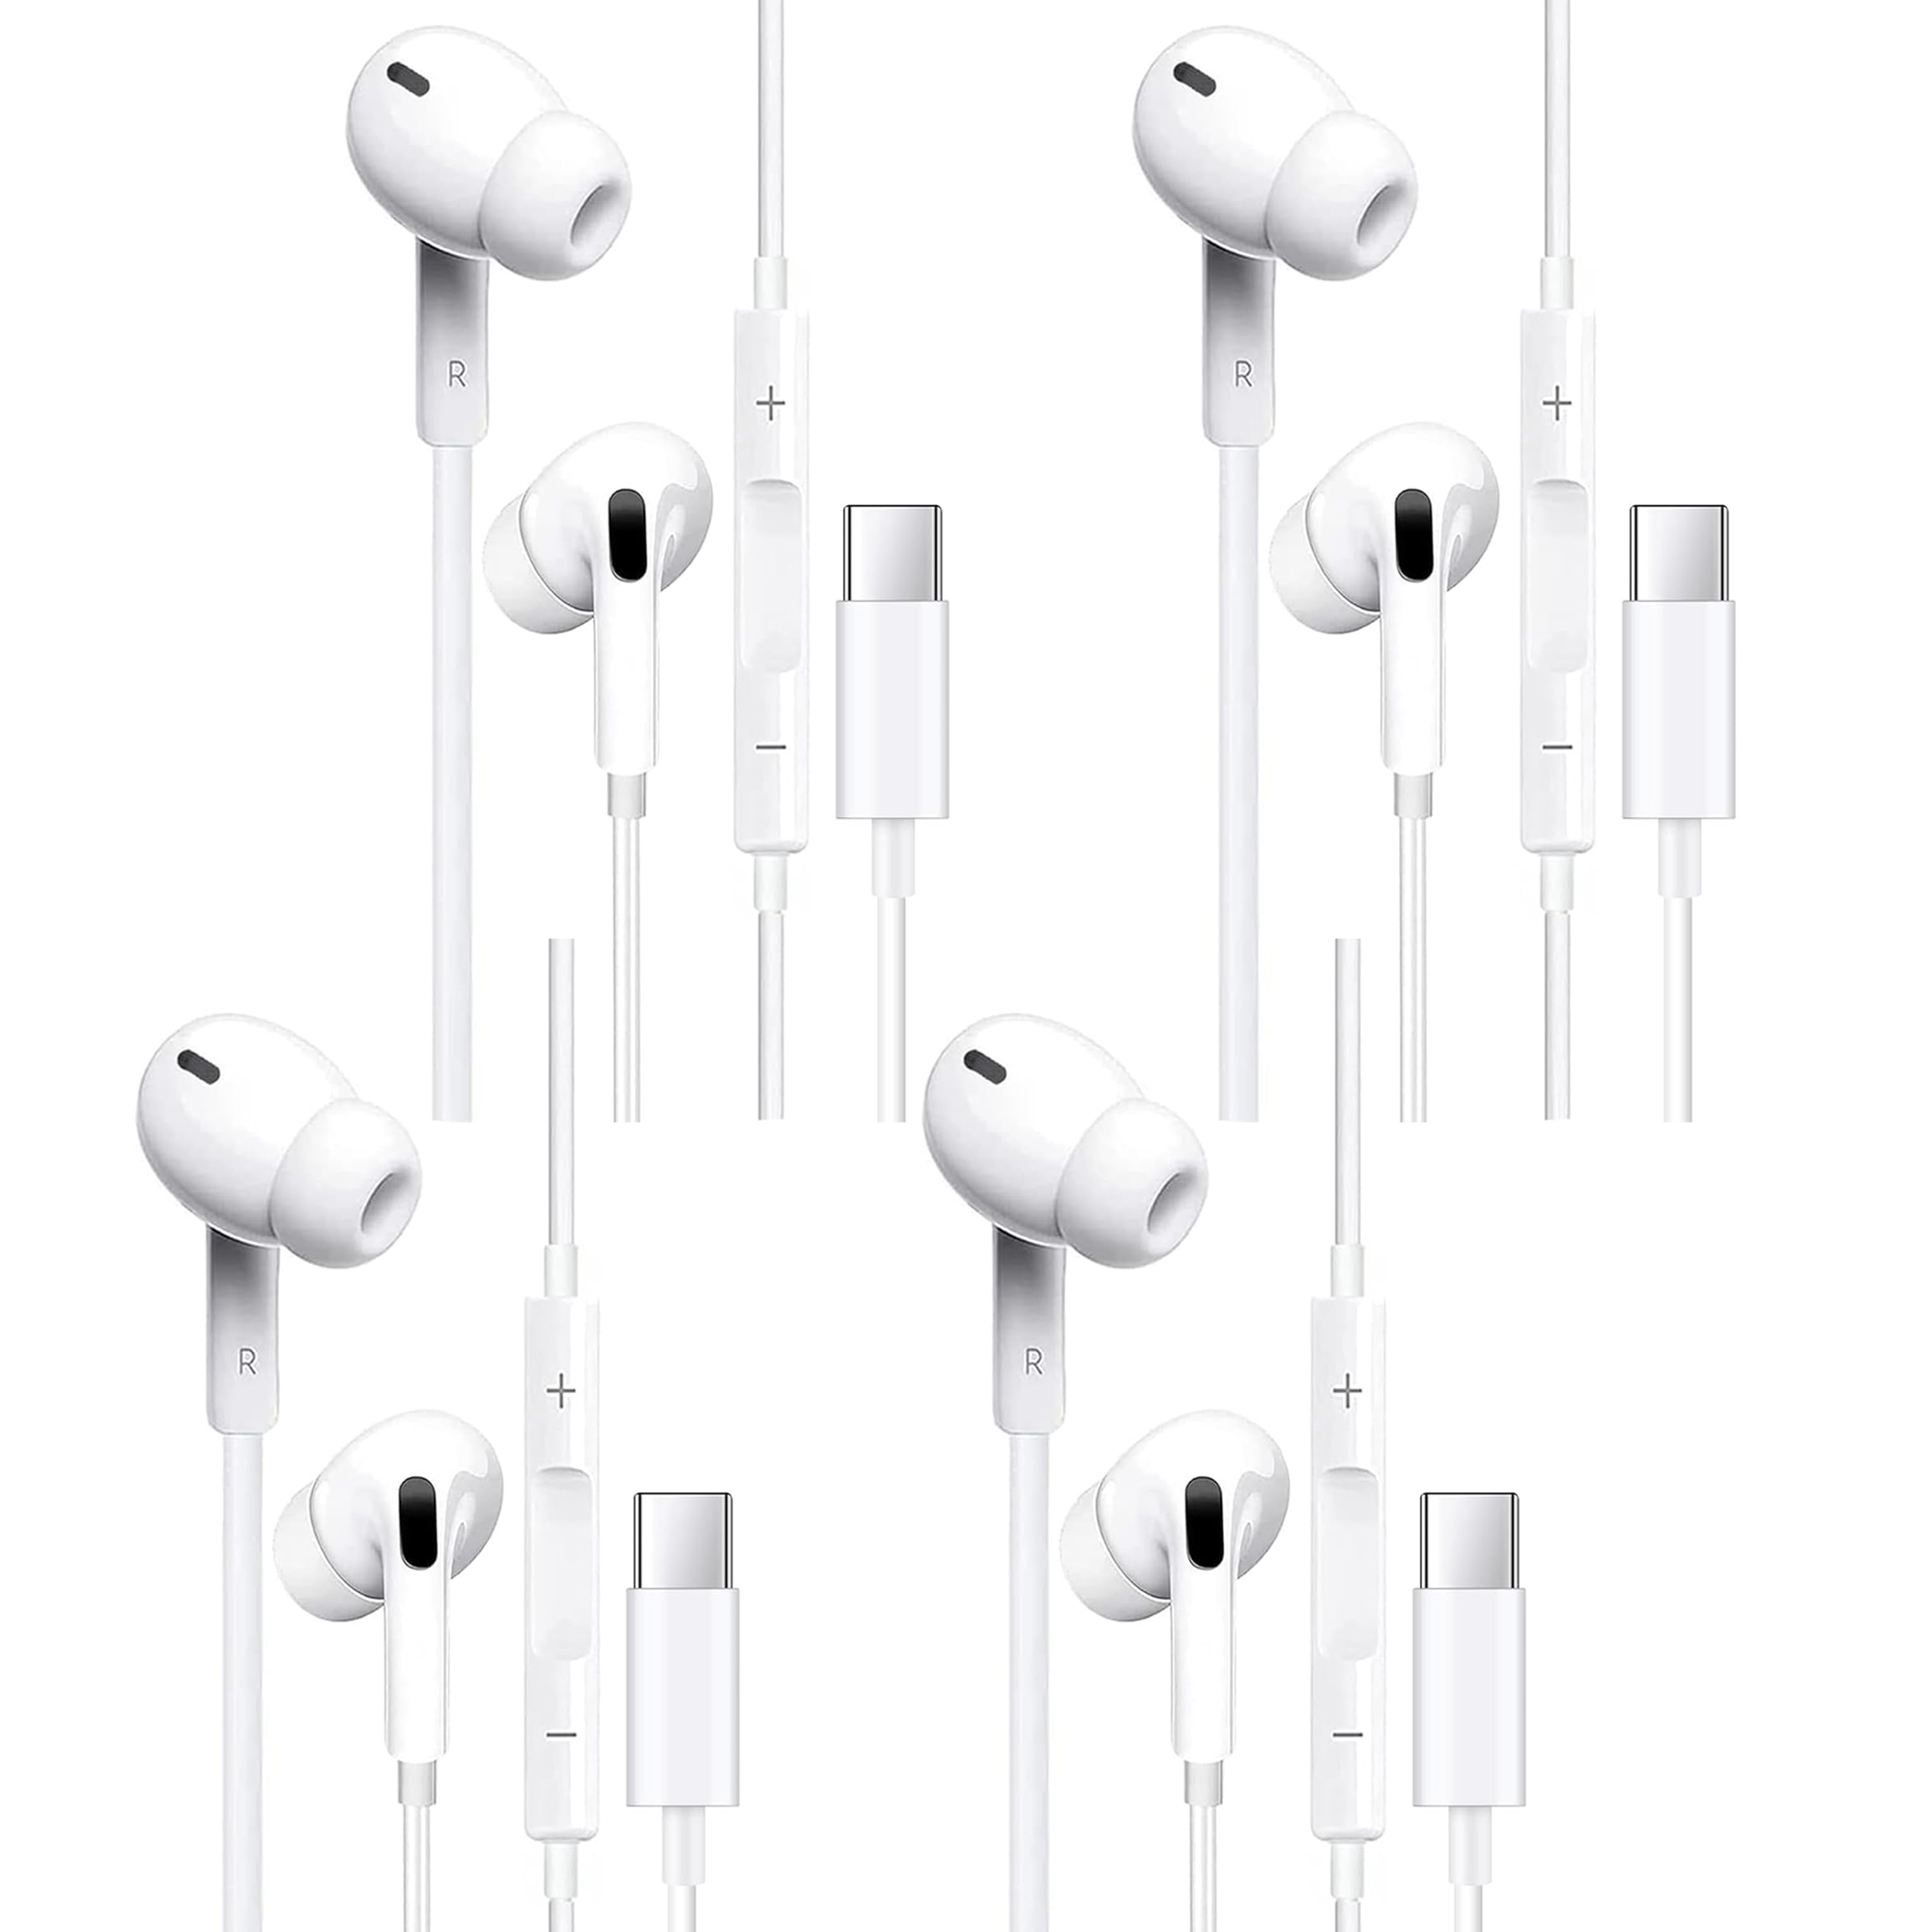 USB C Headphones Pack of 4, Type C Wired Earbuds, In-Ear Headphones with Microphone Noise Canceling Stereo, Earphones Compatible with iPhone 15/Samsung S23/Android/iPad Pro and Most USB C Devices - image 1 of 9